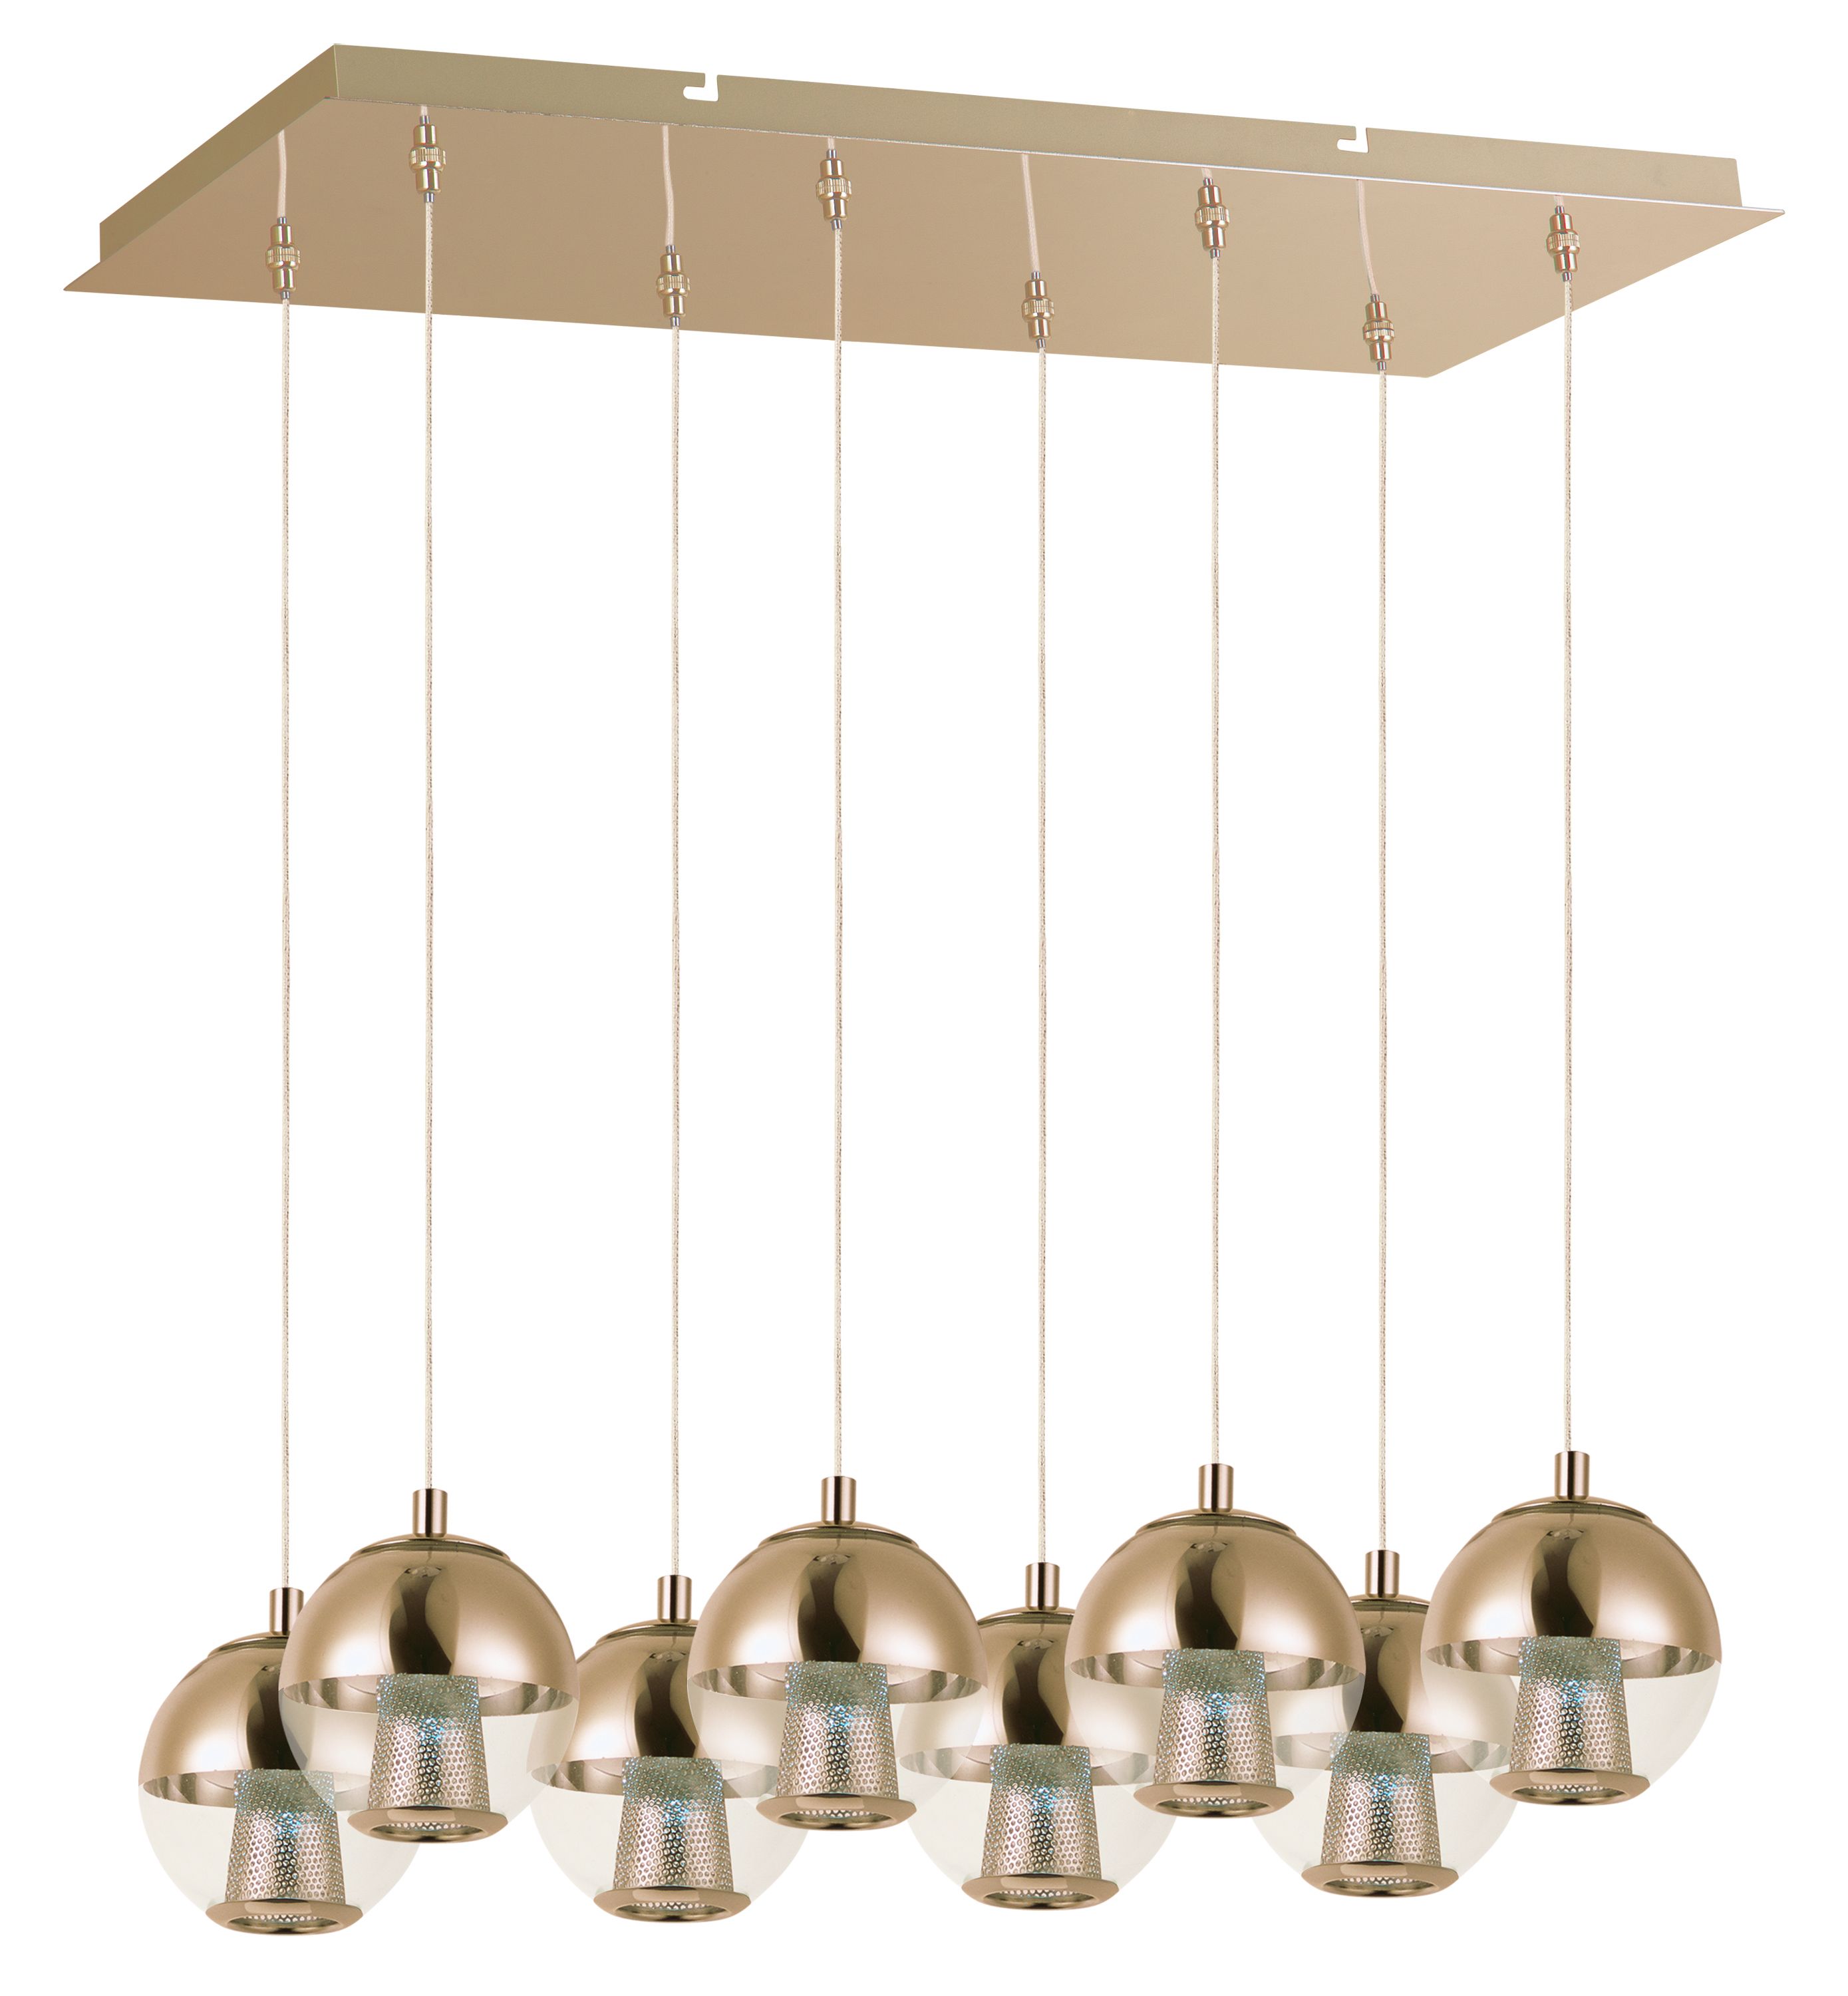 ET2 Lighting-E22786-81PC-Reflex-LED Pendant in Contemporary style-11 Inches wide by 6.5 inches high   Polished Chrome Finish with Mirror Chrome Glass